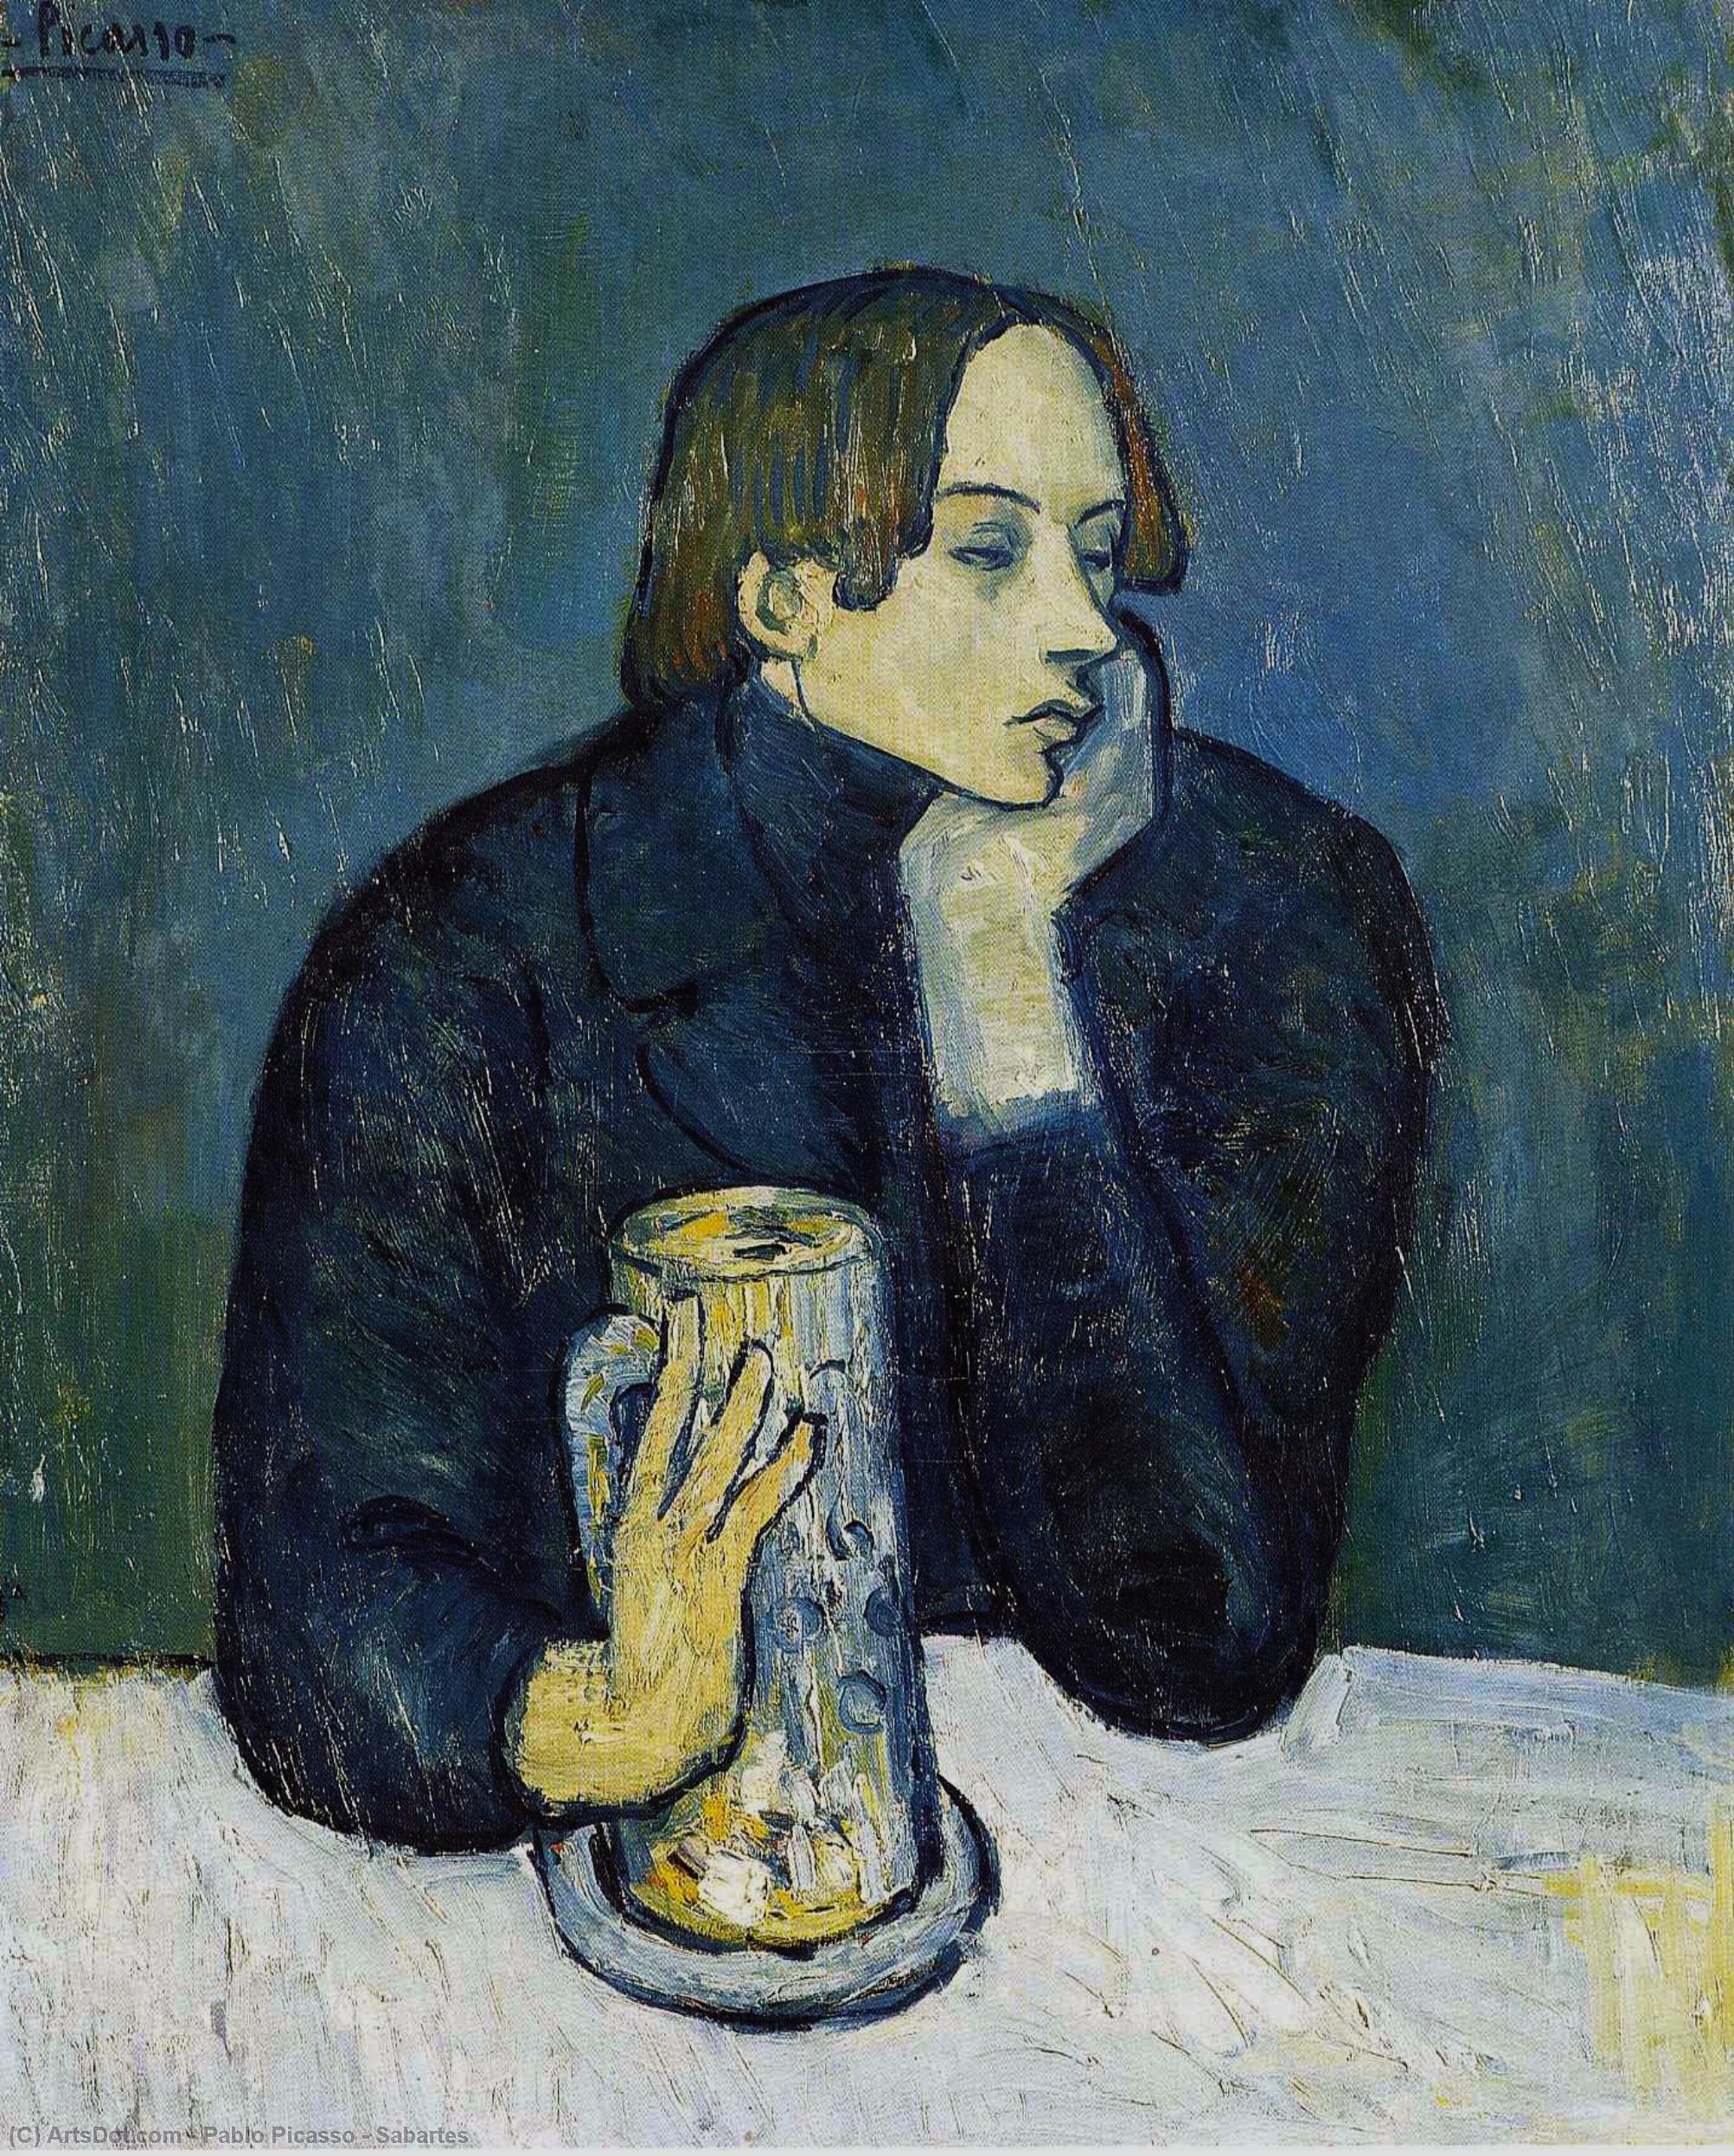  Oil Painting Replica Sabartes, 1901 by Pablo Picasso (Inspired By) (1881-1973, Spain) | ArtsDot.com